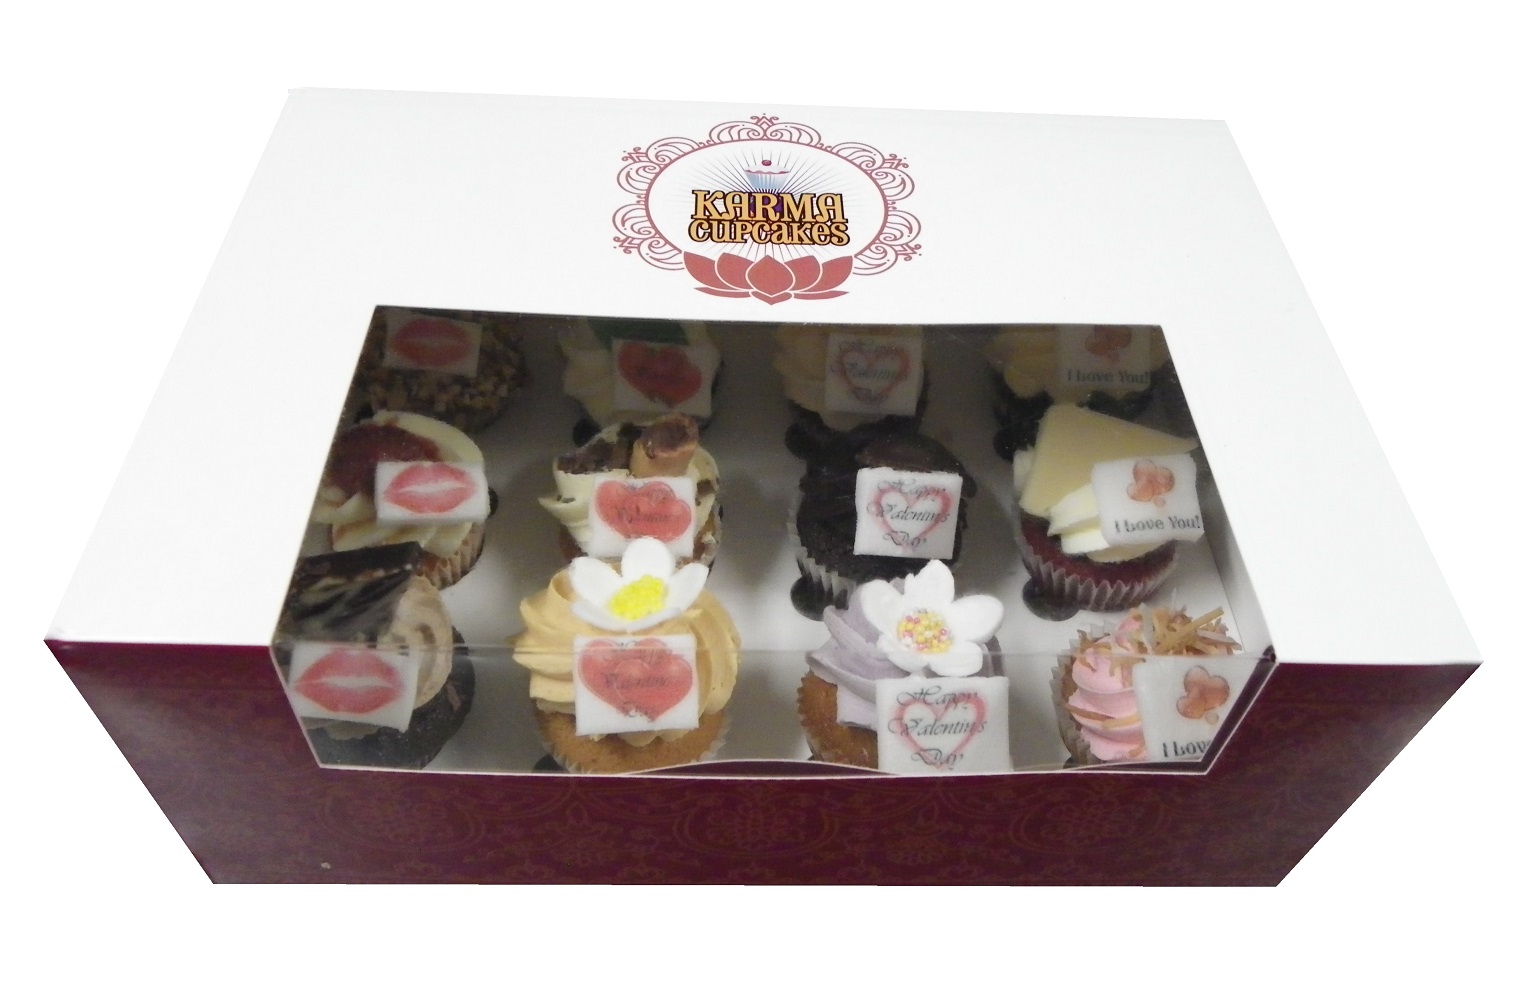 12 High Tea Mini Cupcakes with Valentine's Day messages